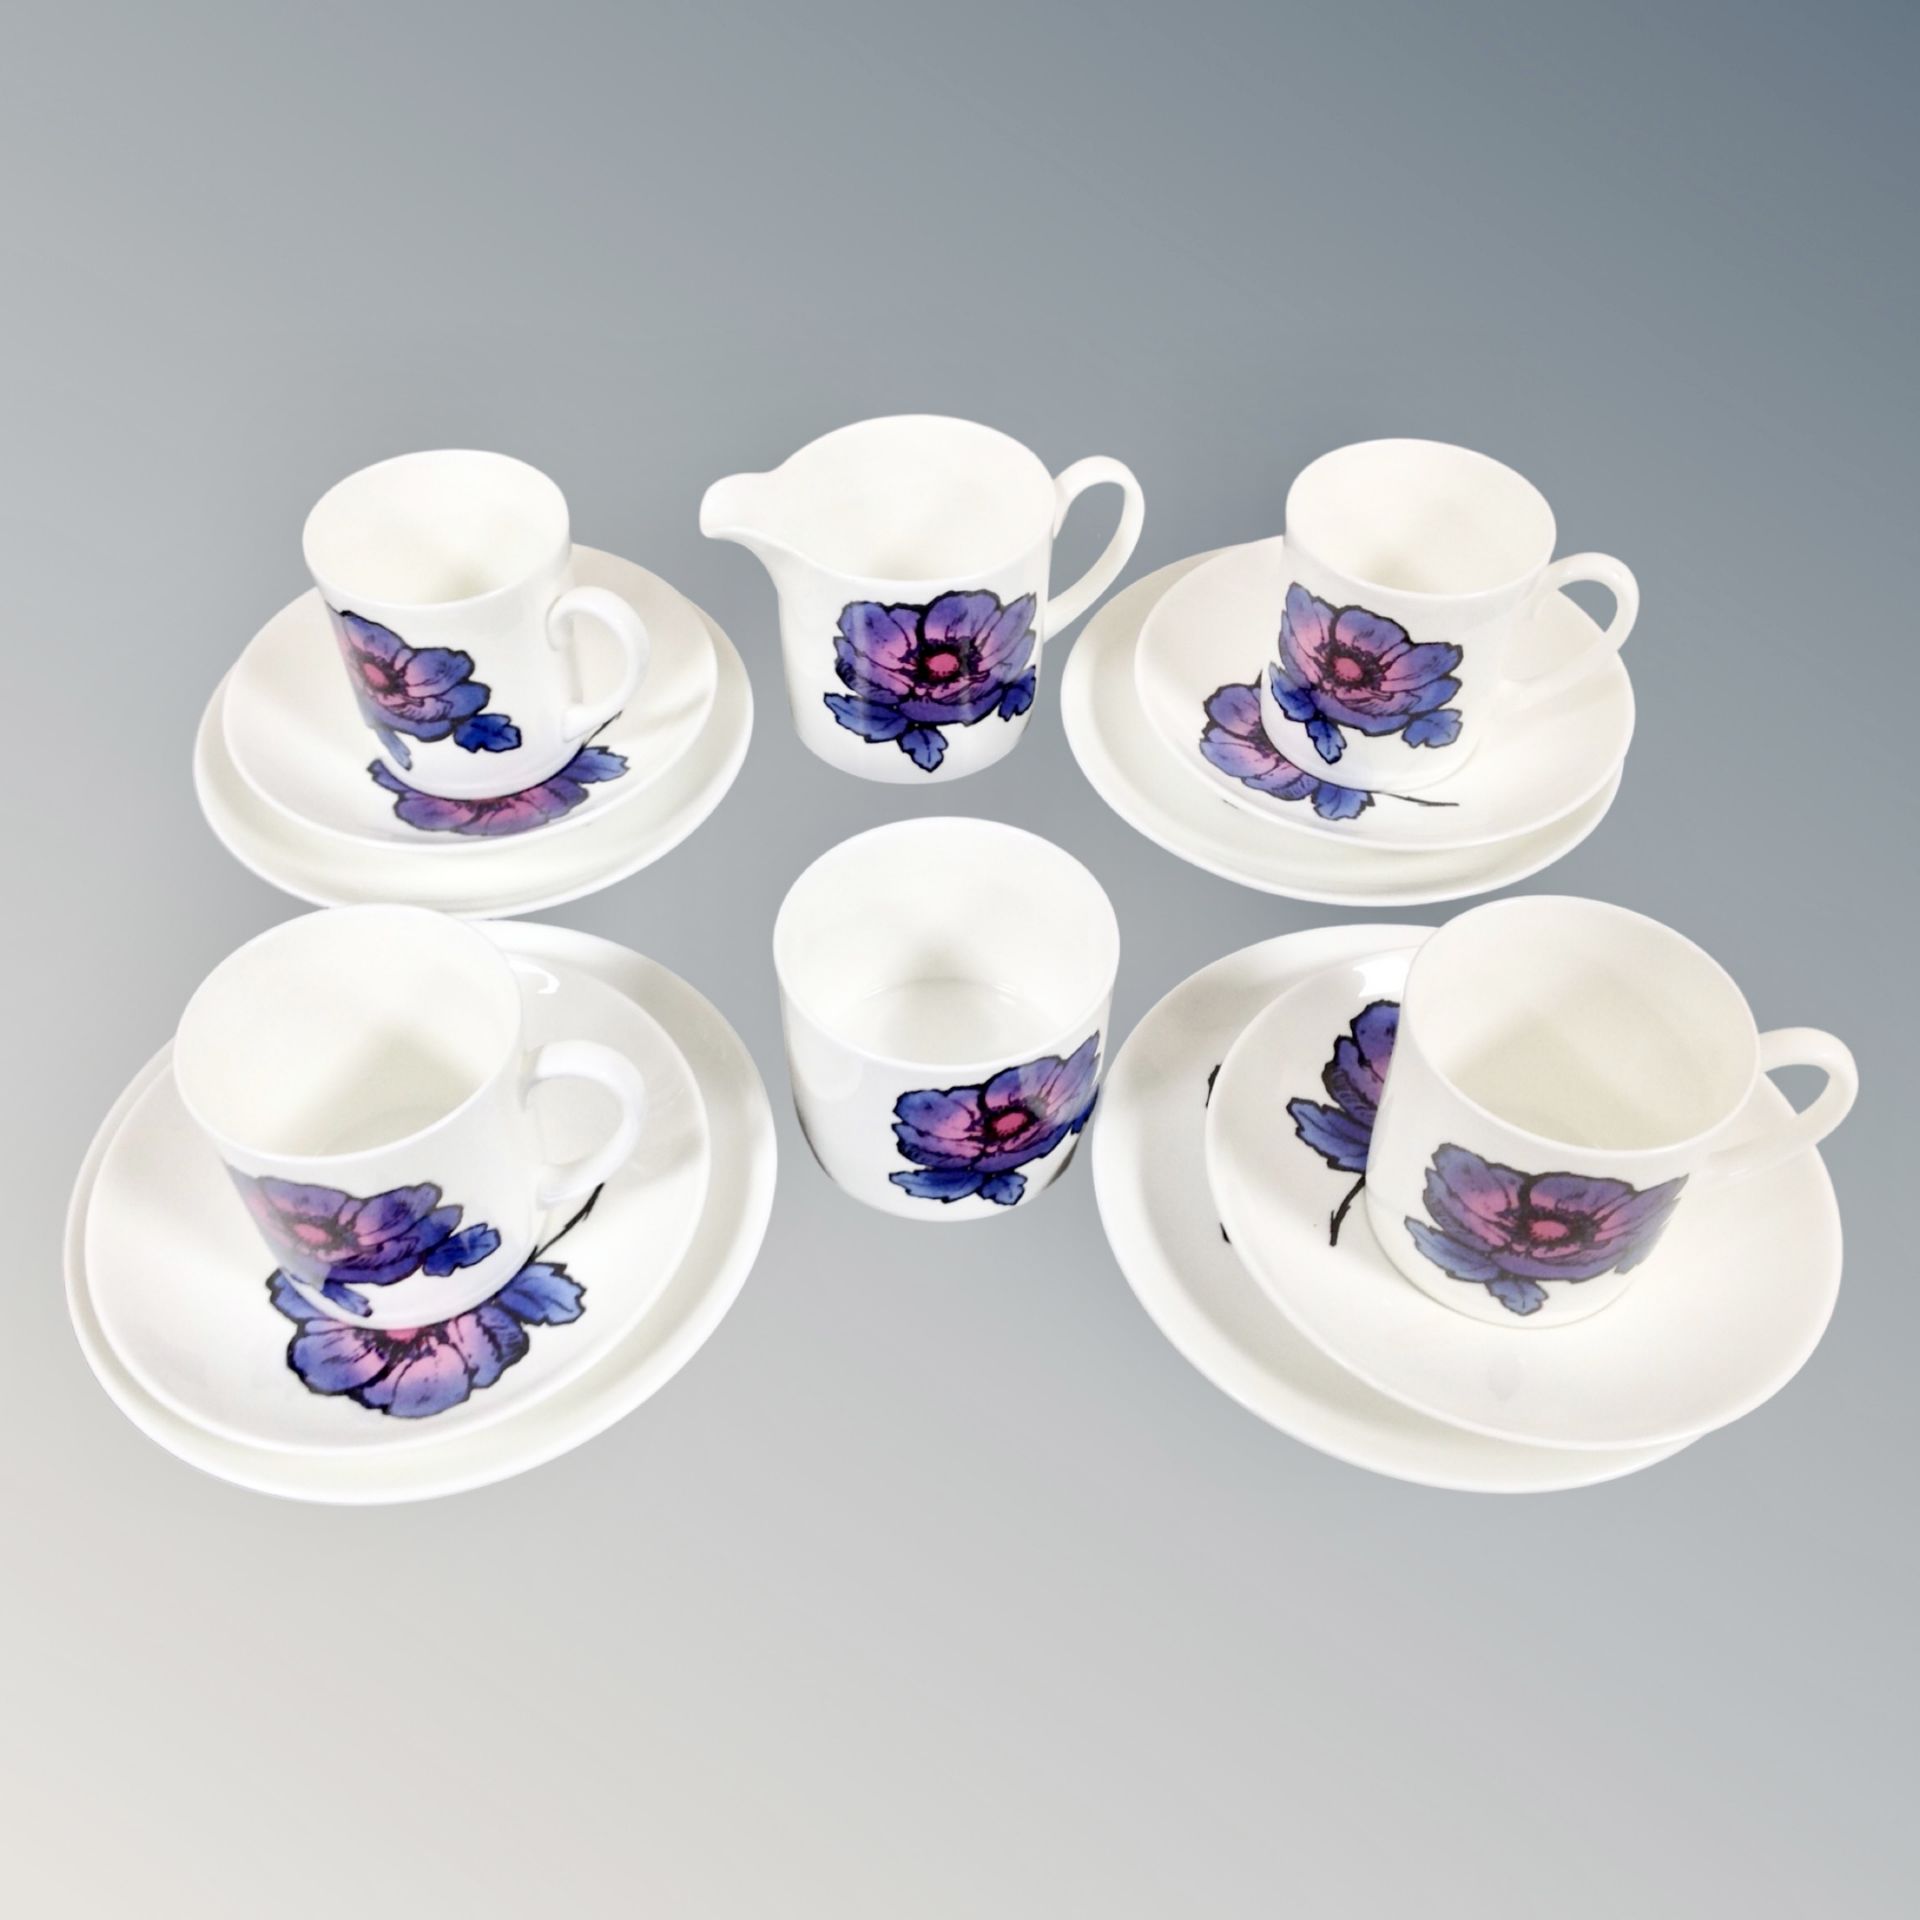 Fourteen pieces of Wedgwood Susie Cooper Anemone tea china